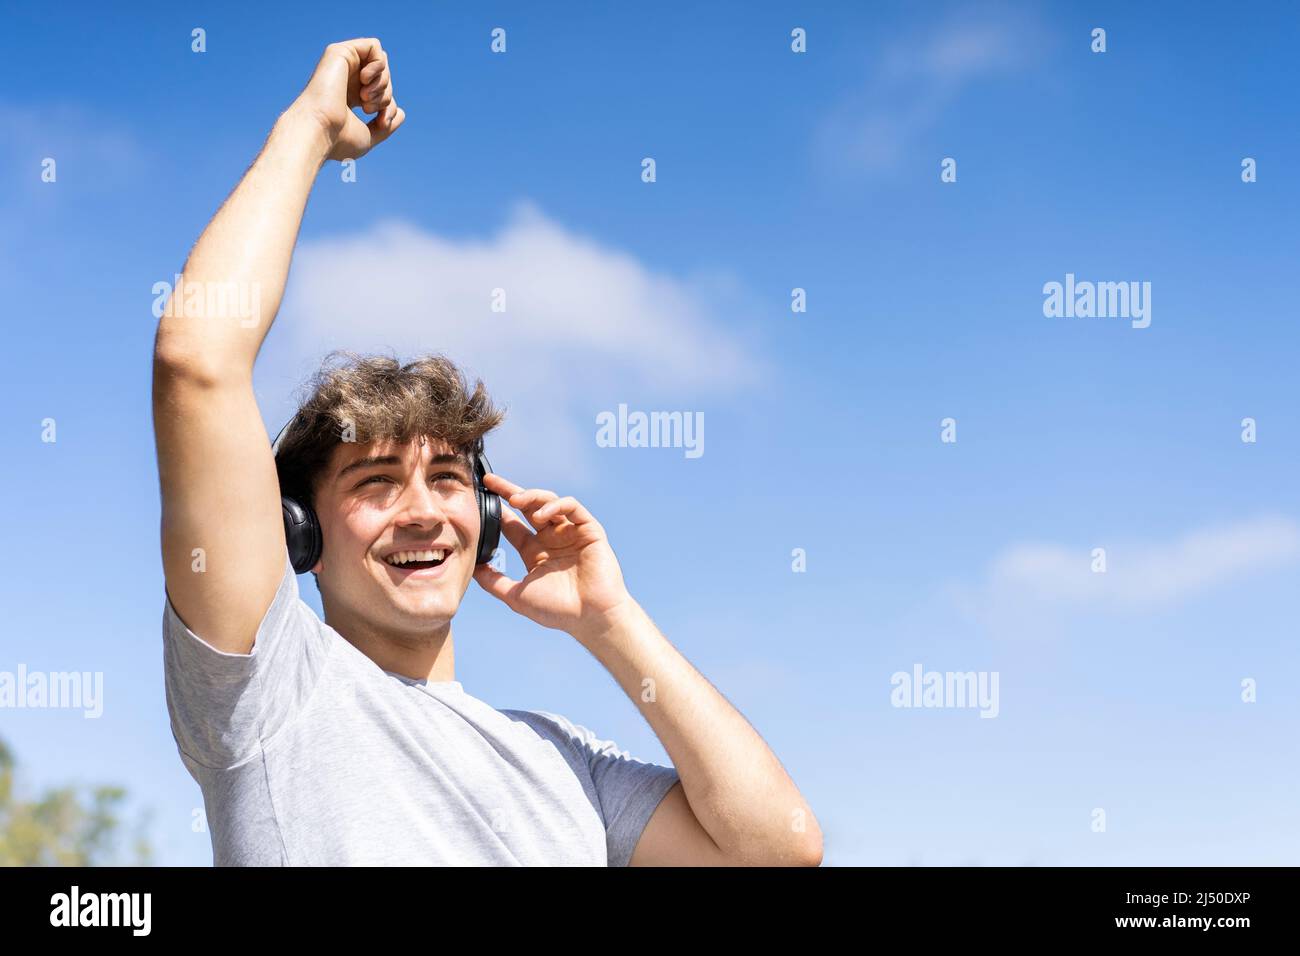 Young man listening to music outdoors with bluetooth headphones. Expression of happiness, winning attitude. Stock Photo